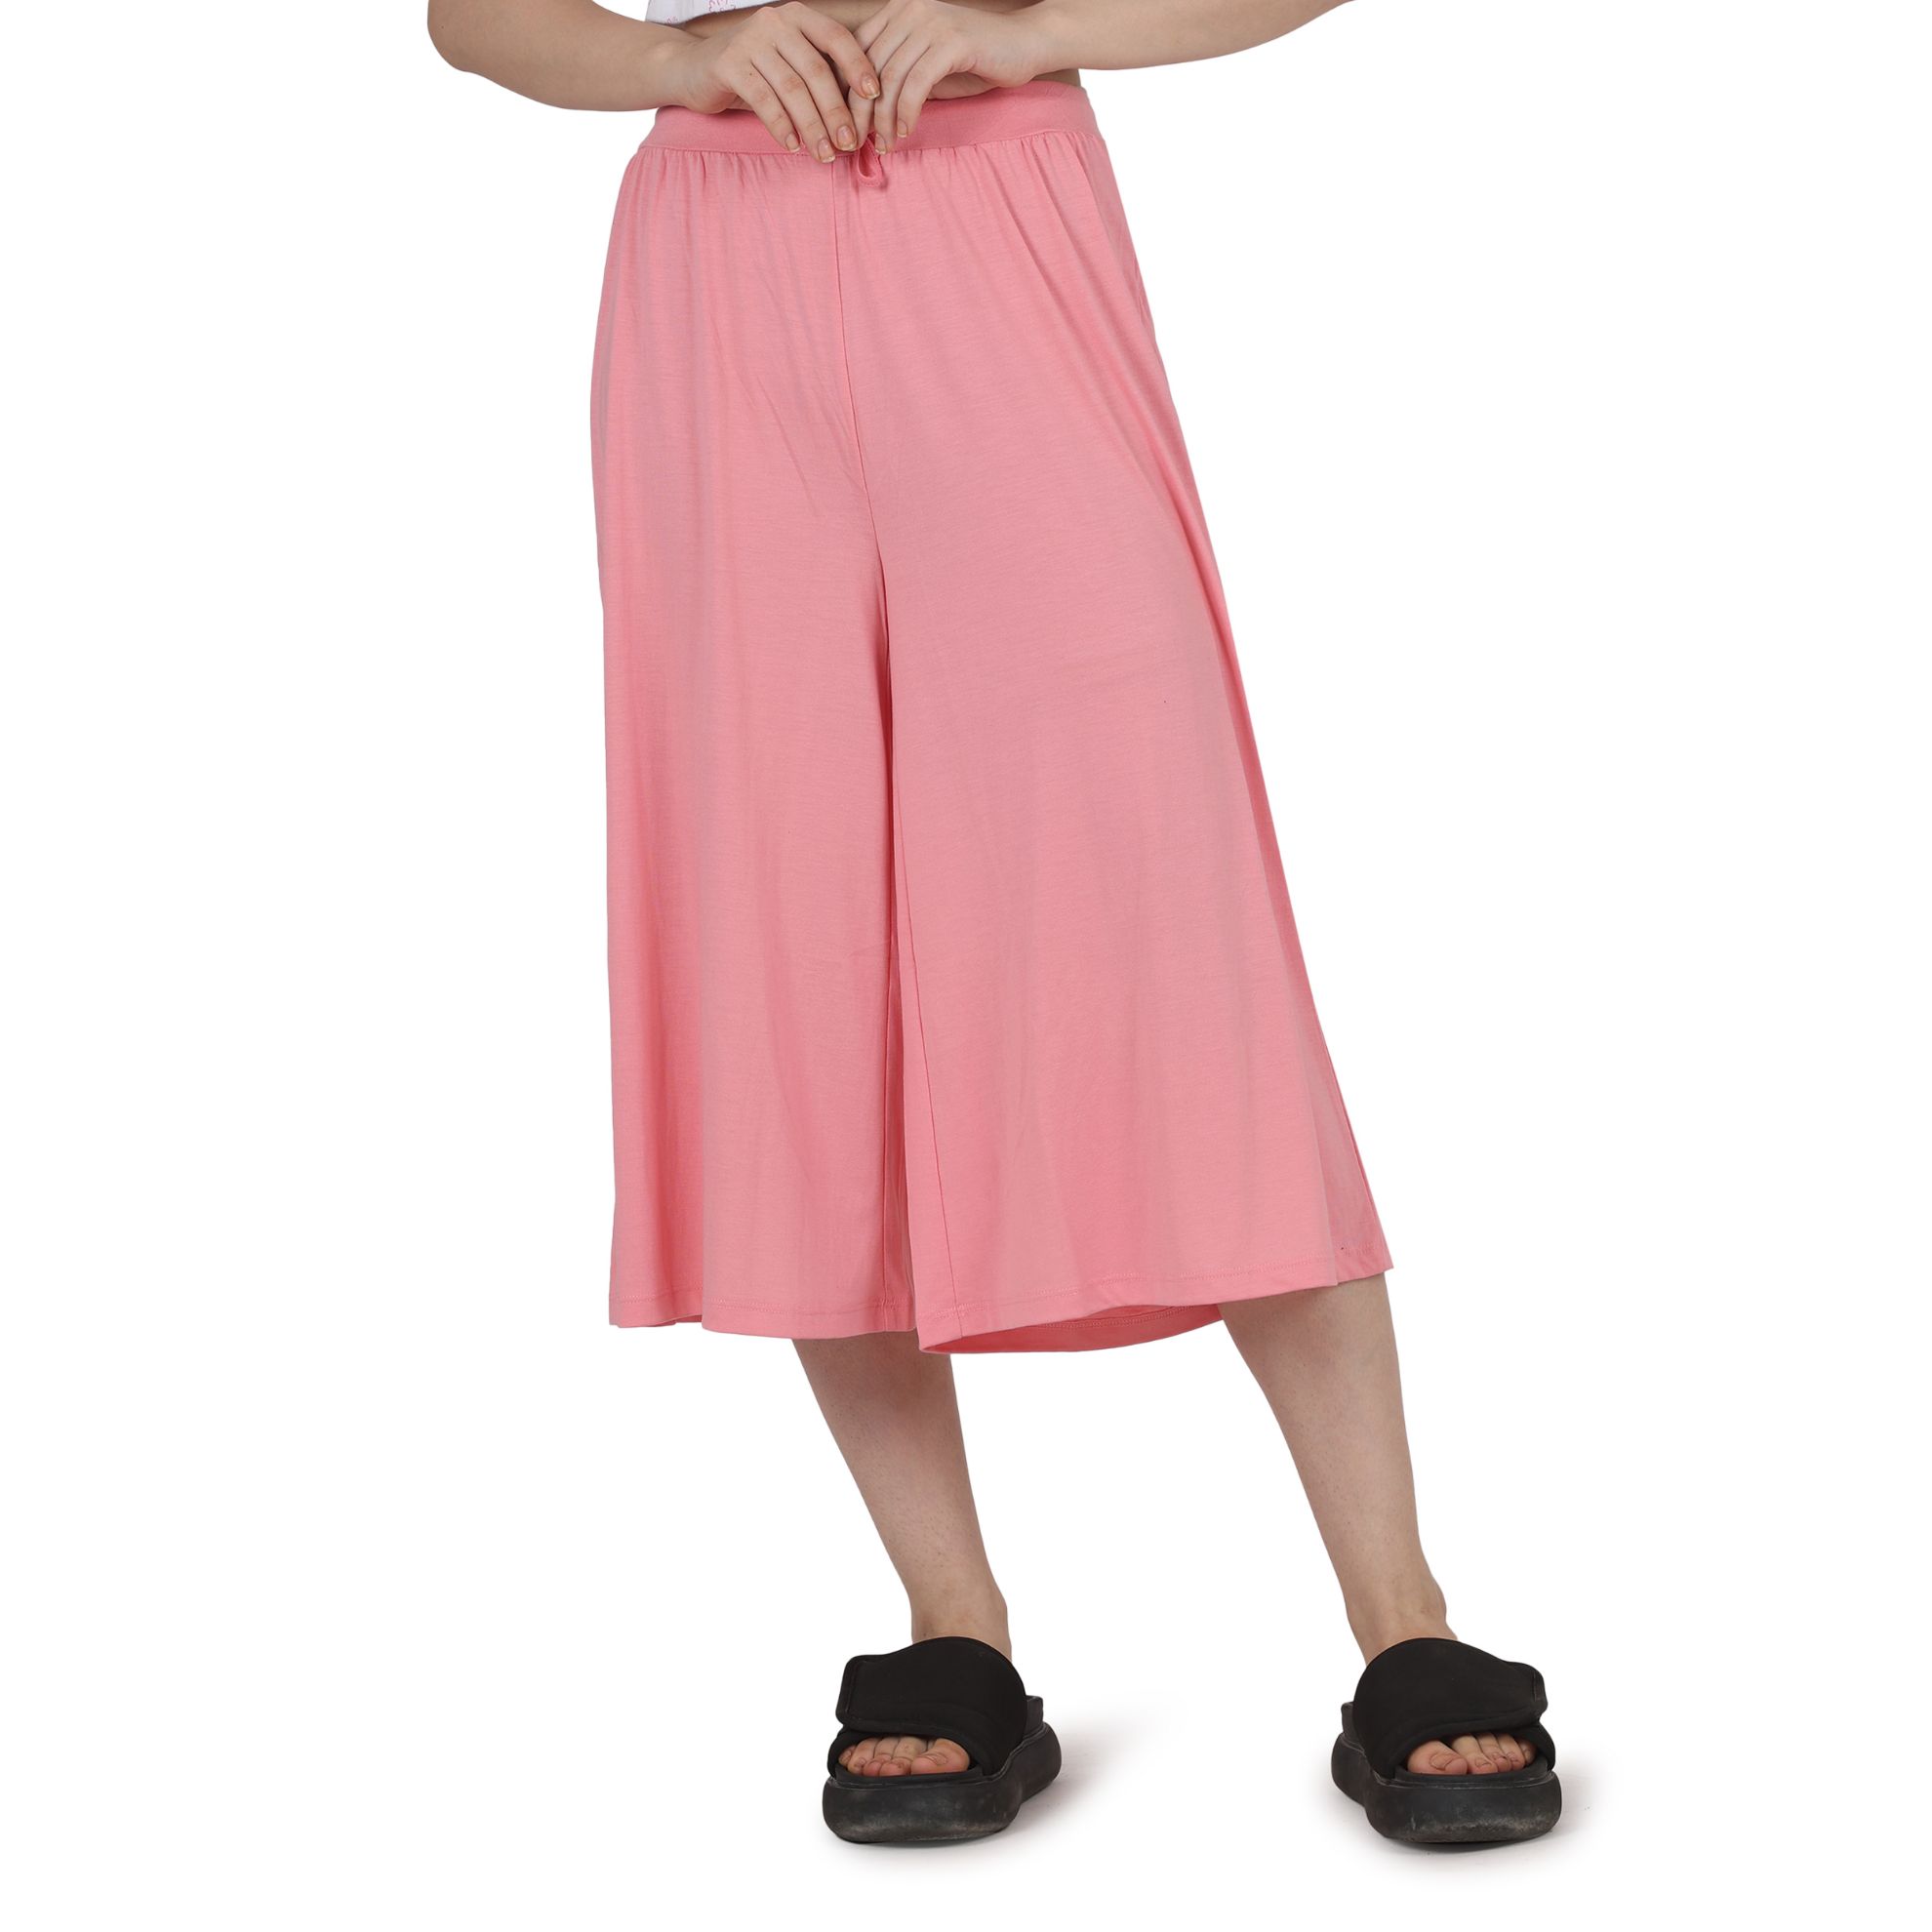 https://frenchtrendz.com/images/thumbs/0005183_frenchtrendz-poly-viscose-light-pink-short-palazzo.jpeg